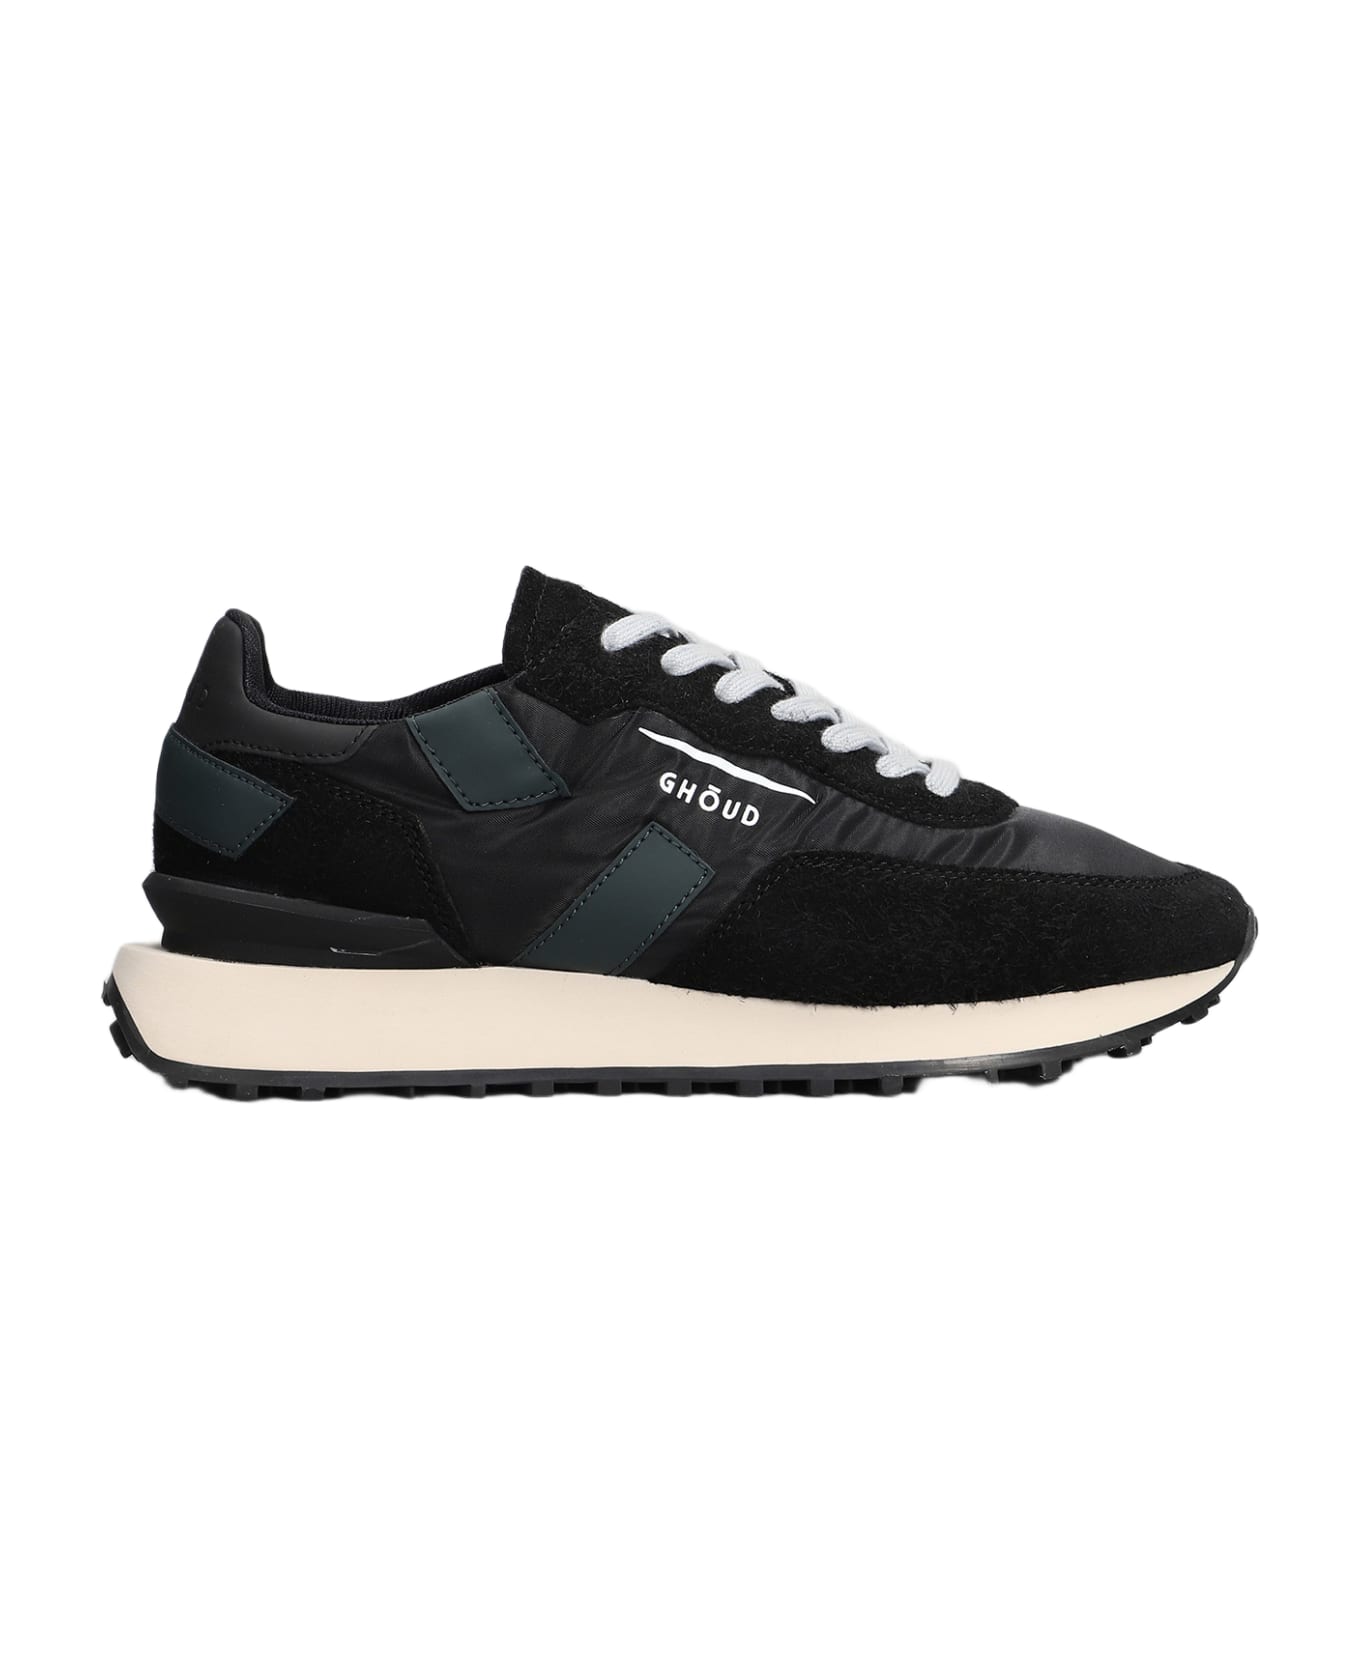 GHOUD Rush One Sneakers In Black Suede And Fabric - Black